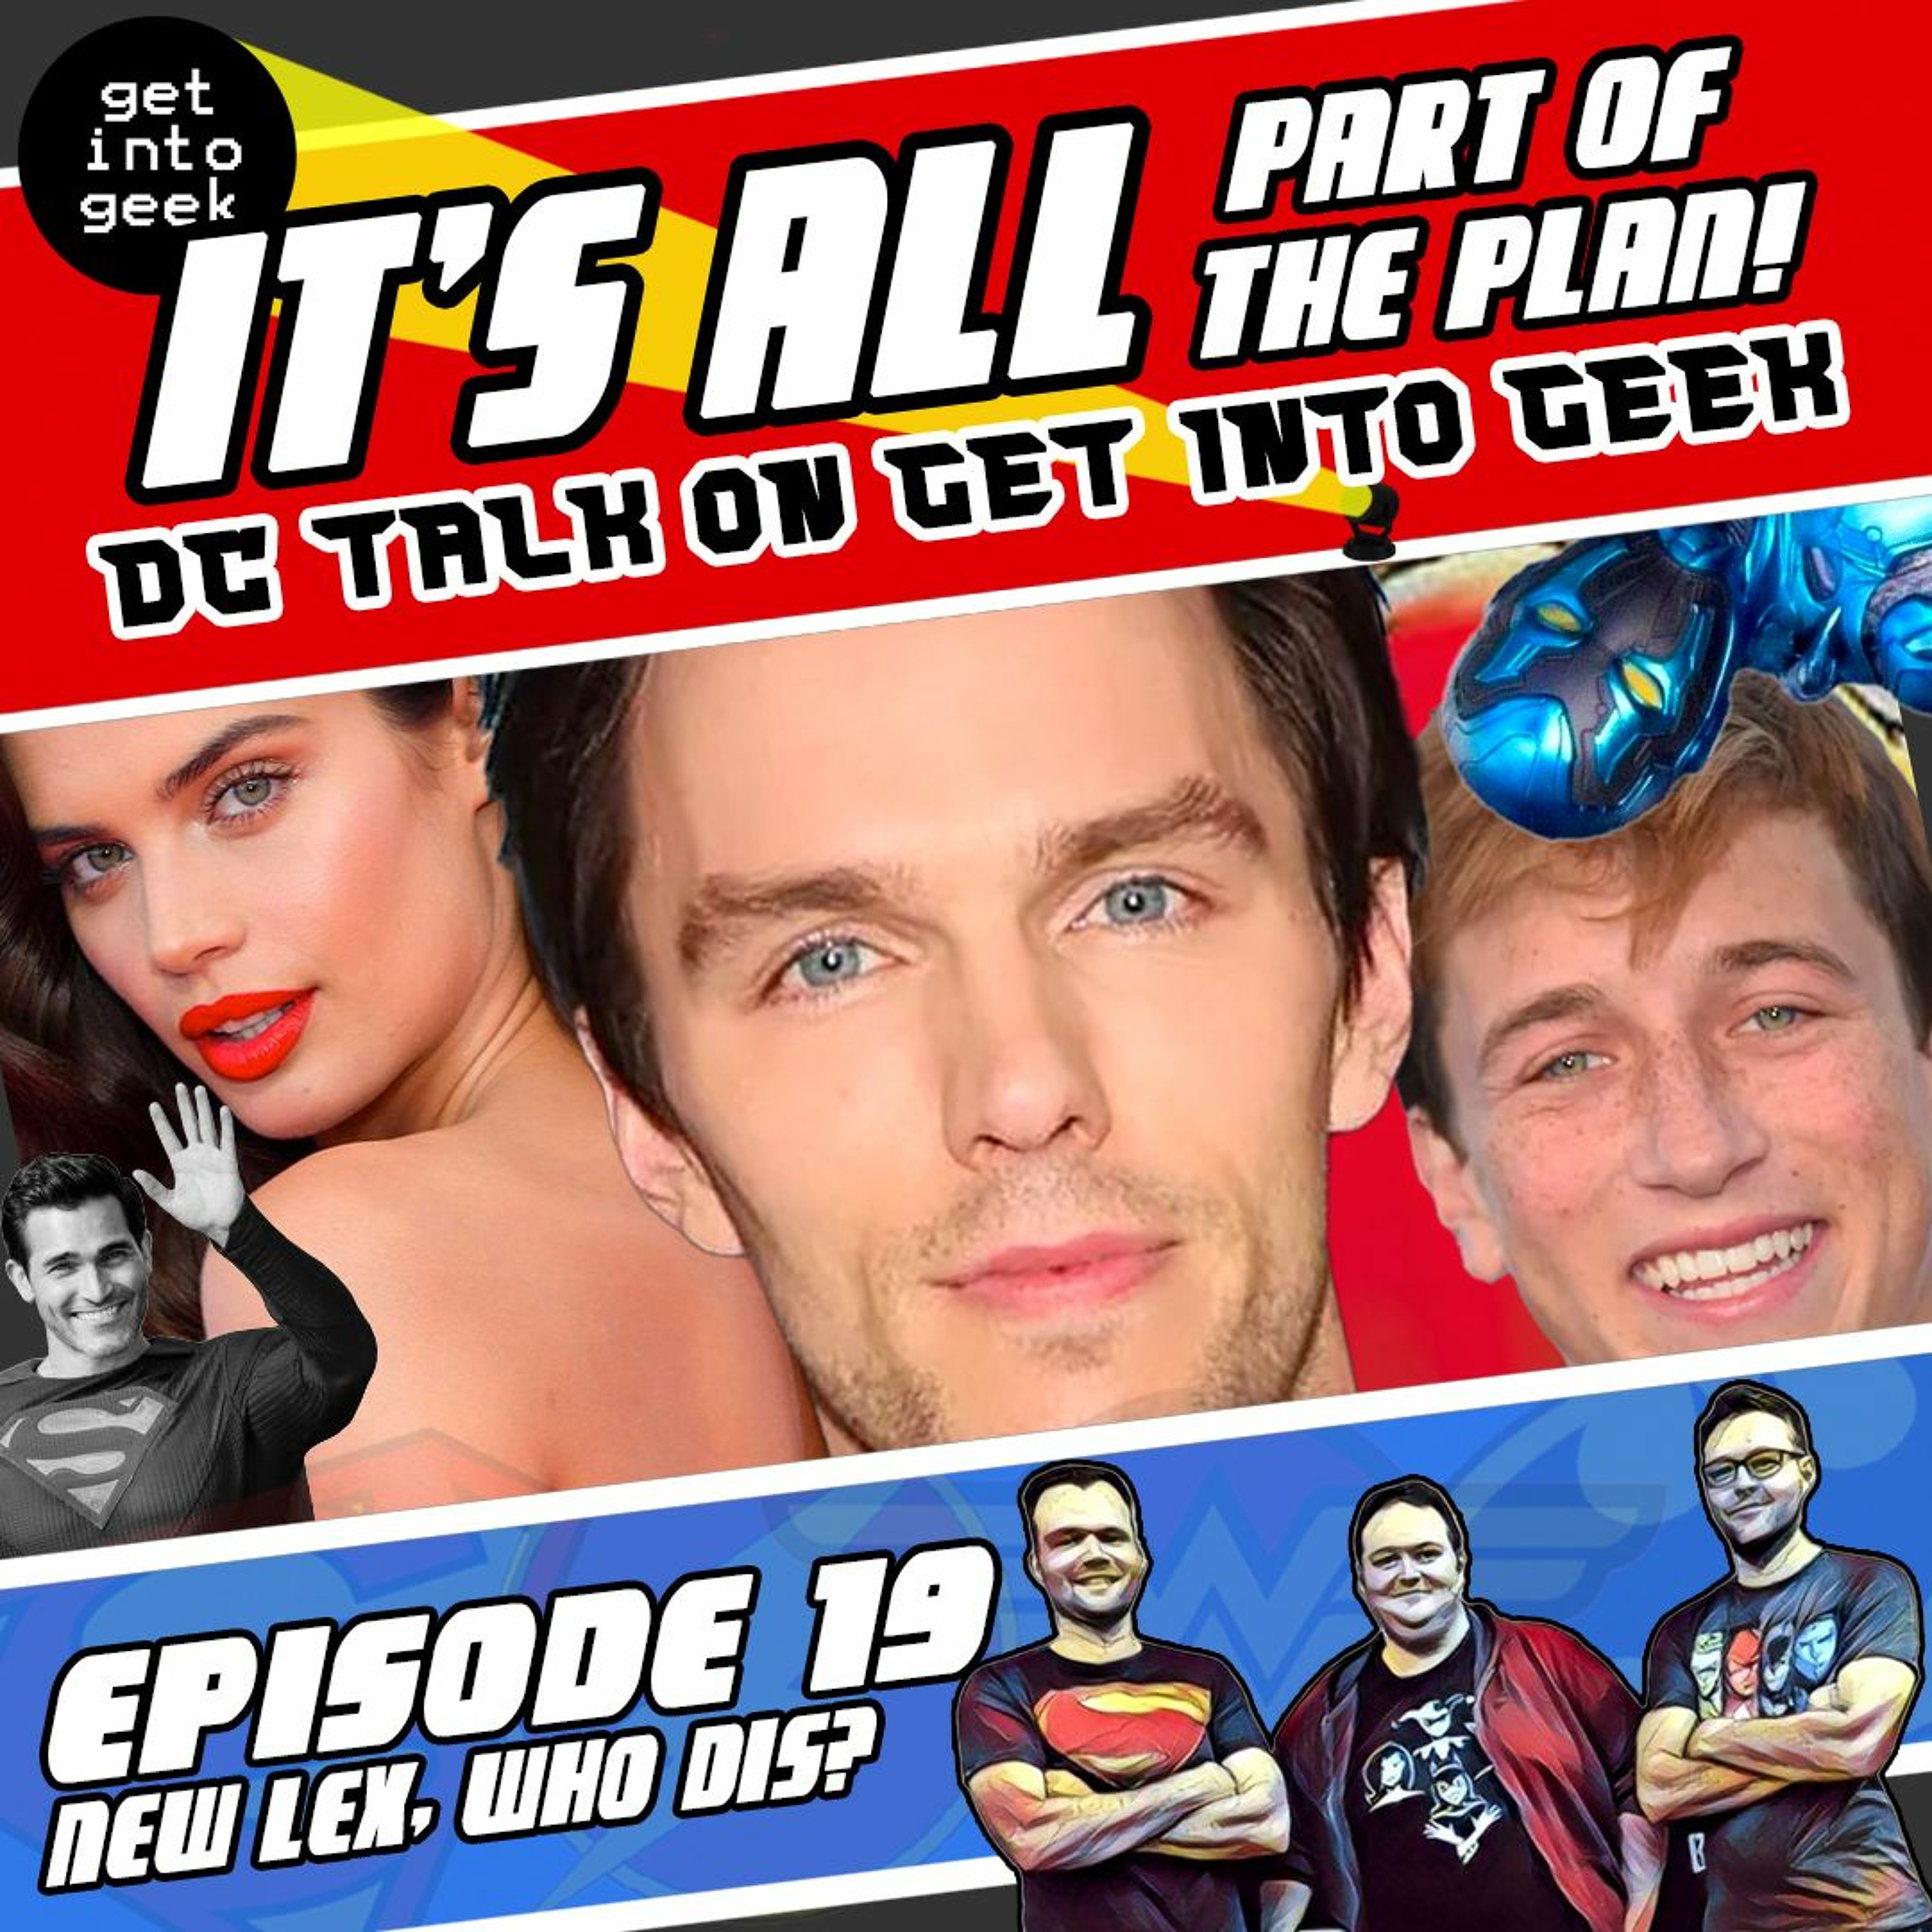 New Lex, Who Dis? (It's All Part Of The Plan - DC Talk Episode 1.19)